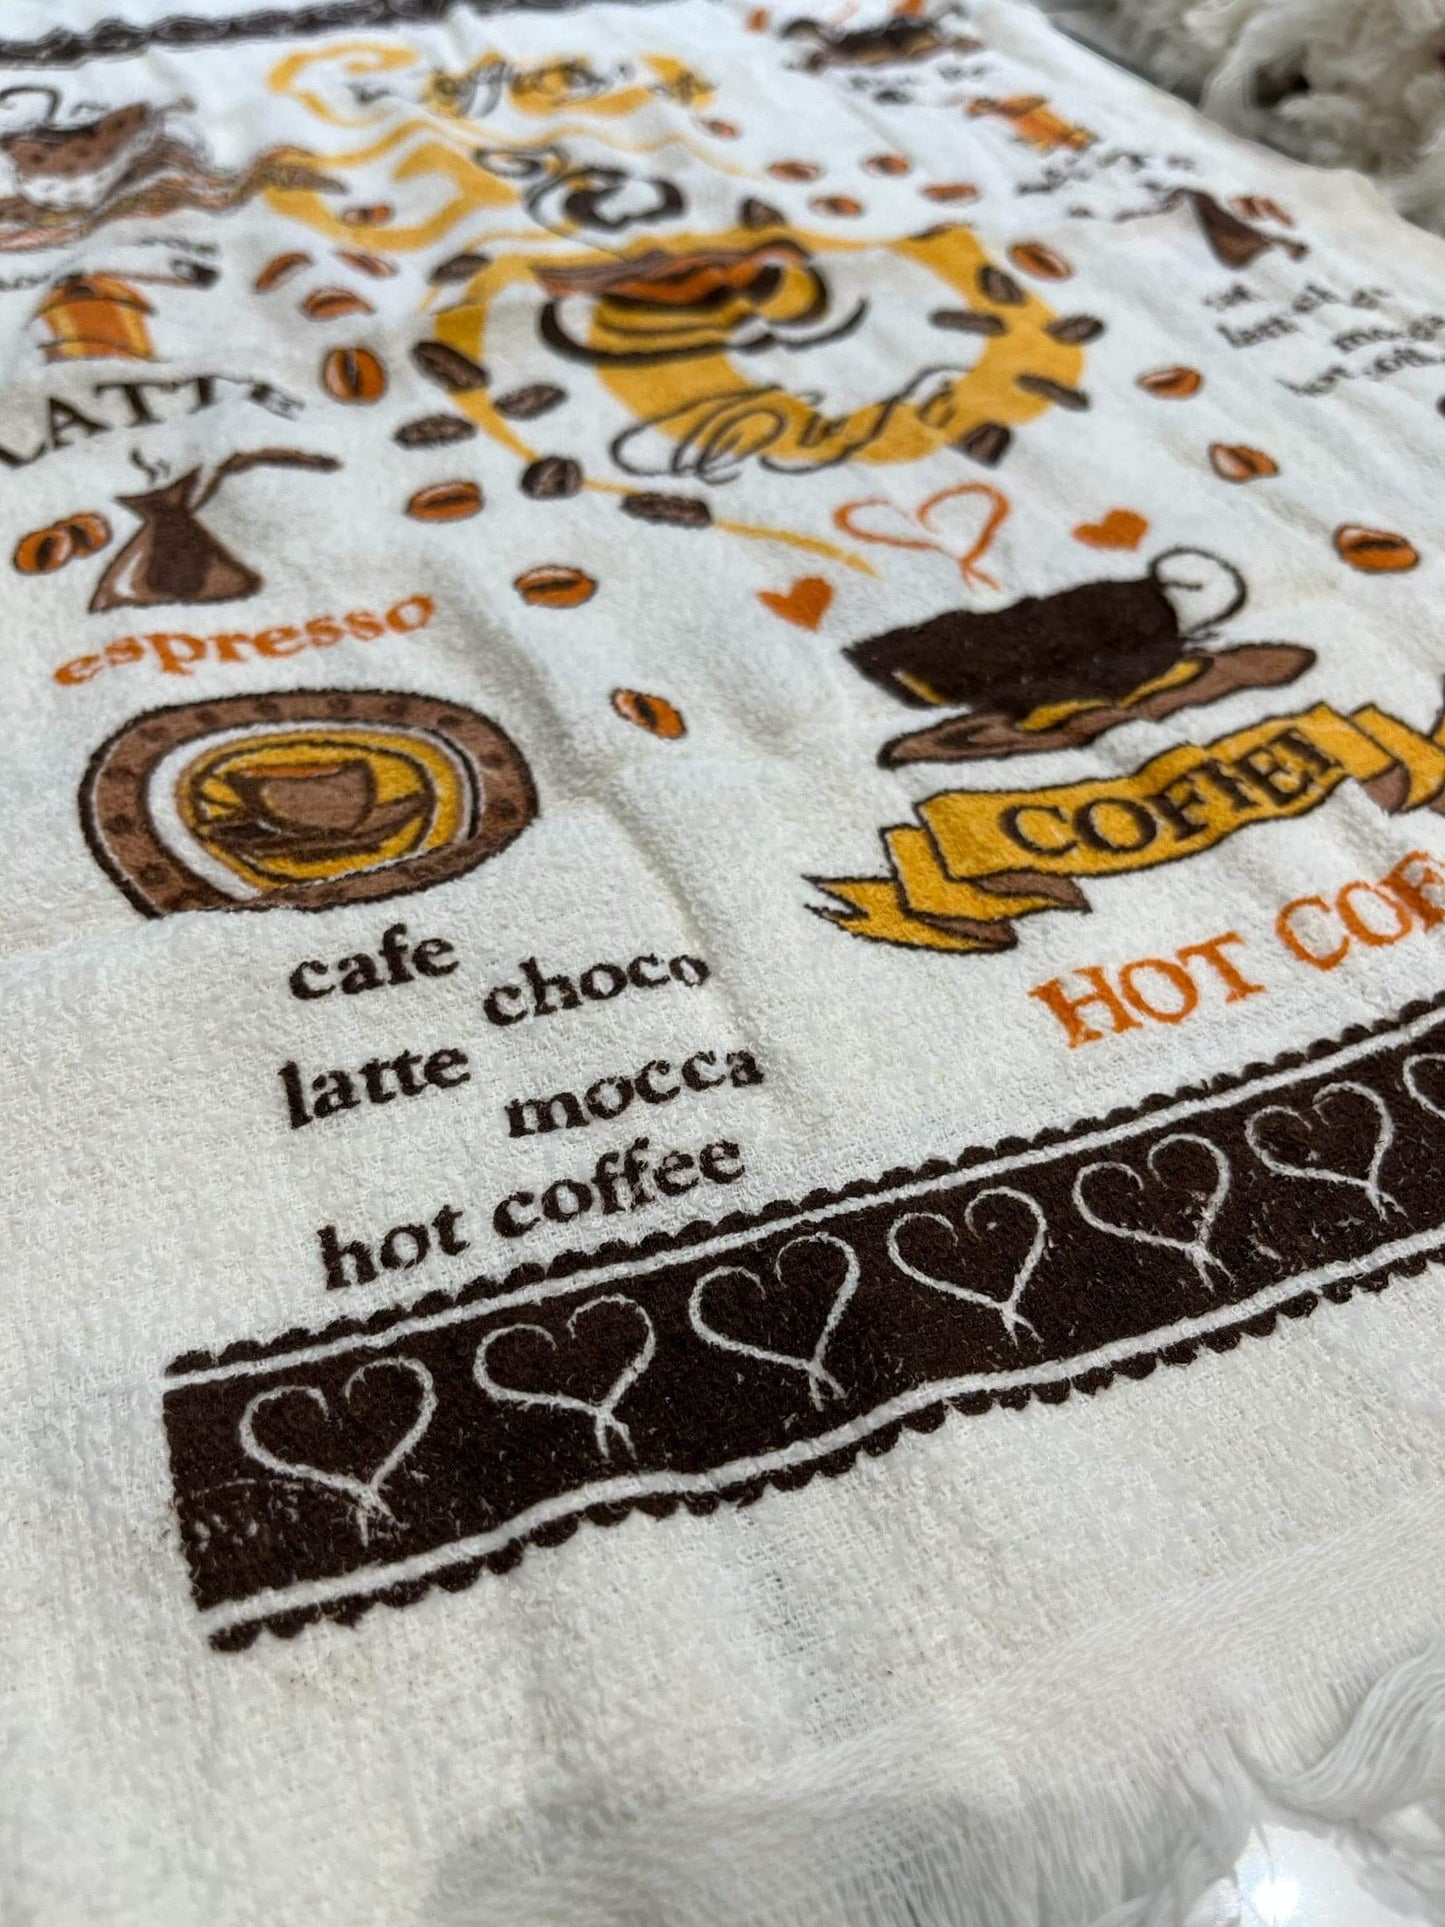 Tea Towels (Cotton Kitchen Towels) Coffee100% Cotton Tea Towel, made in Turkey, These towels offer premium quality with their pure cotton composition, ensuring high absorbency for drying dishes and versatile use in various kitchen tasks. Their durability